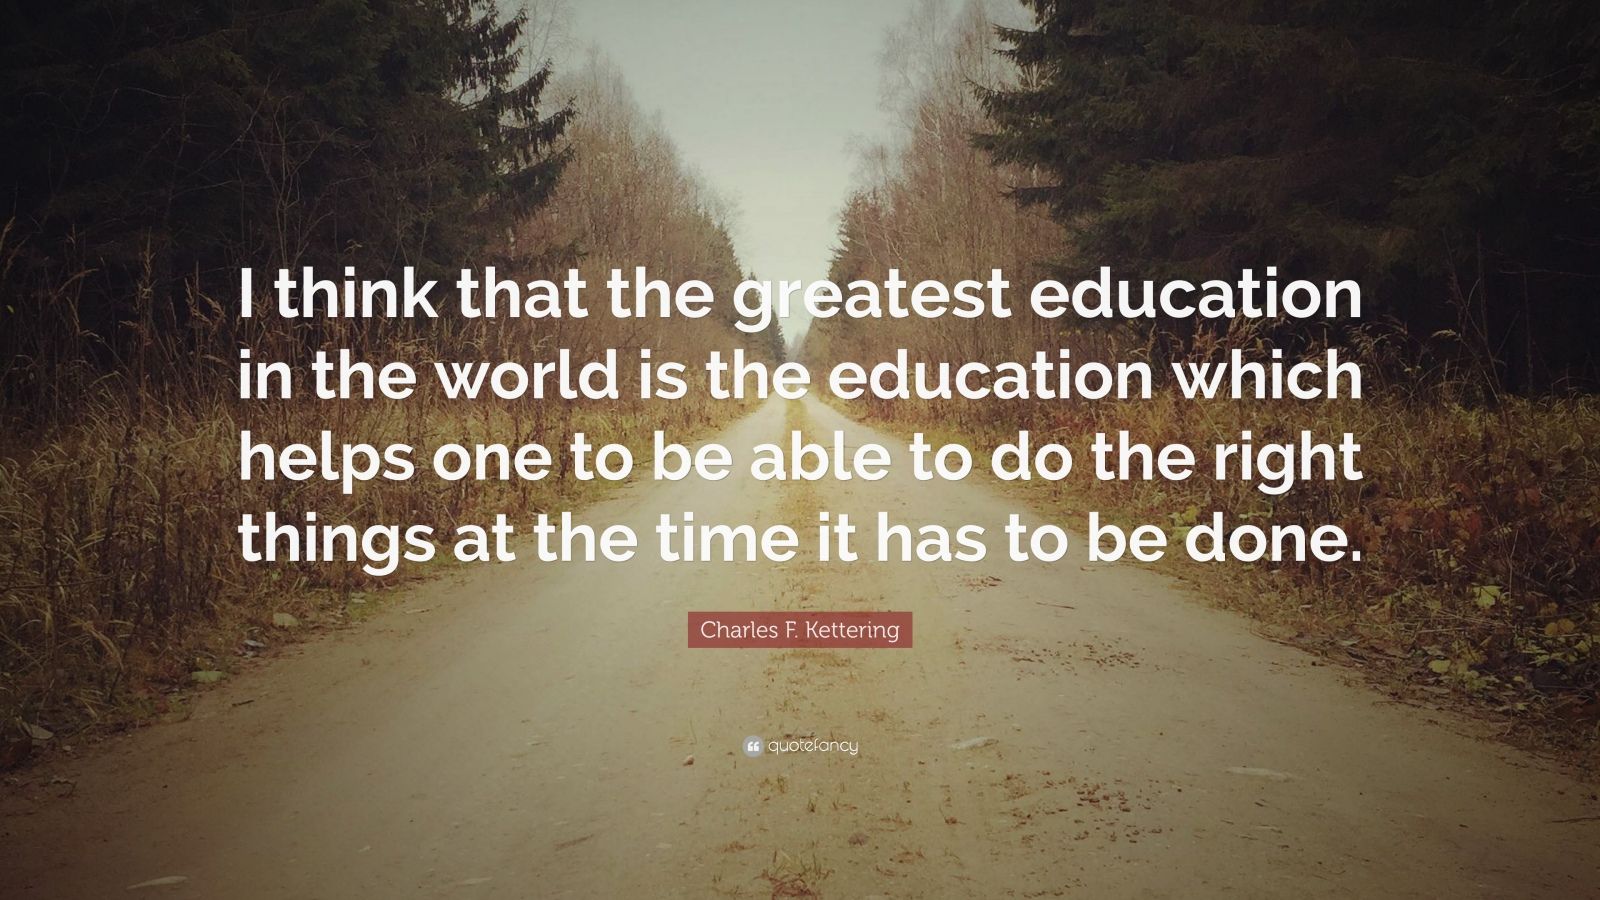 Charles F. Kettering Quote: “I think that the greatest education in the ...